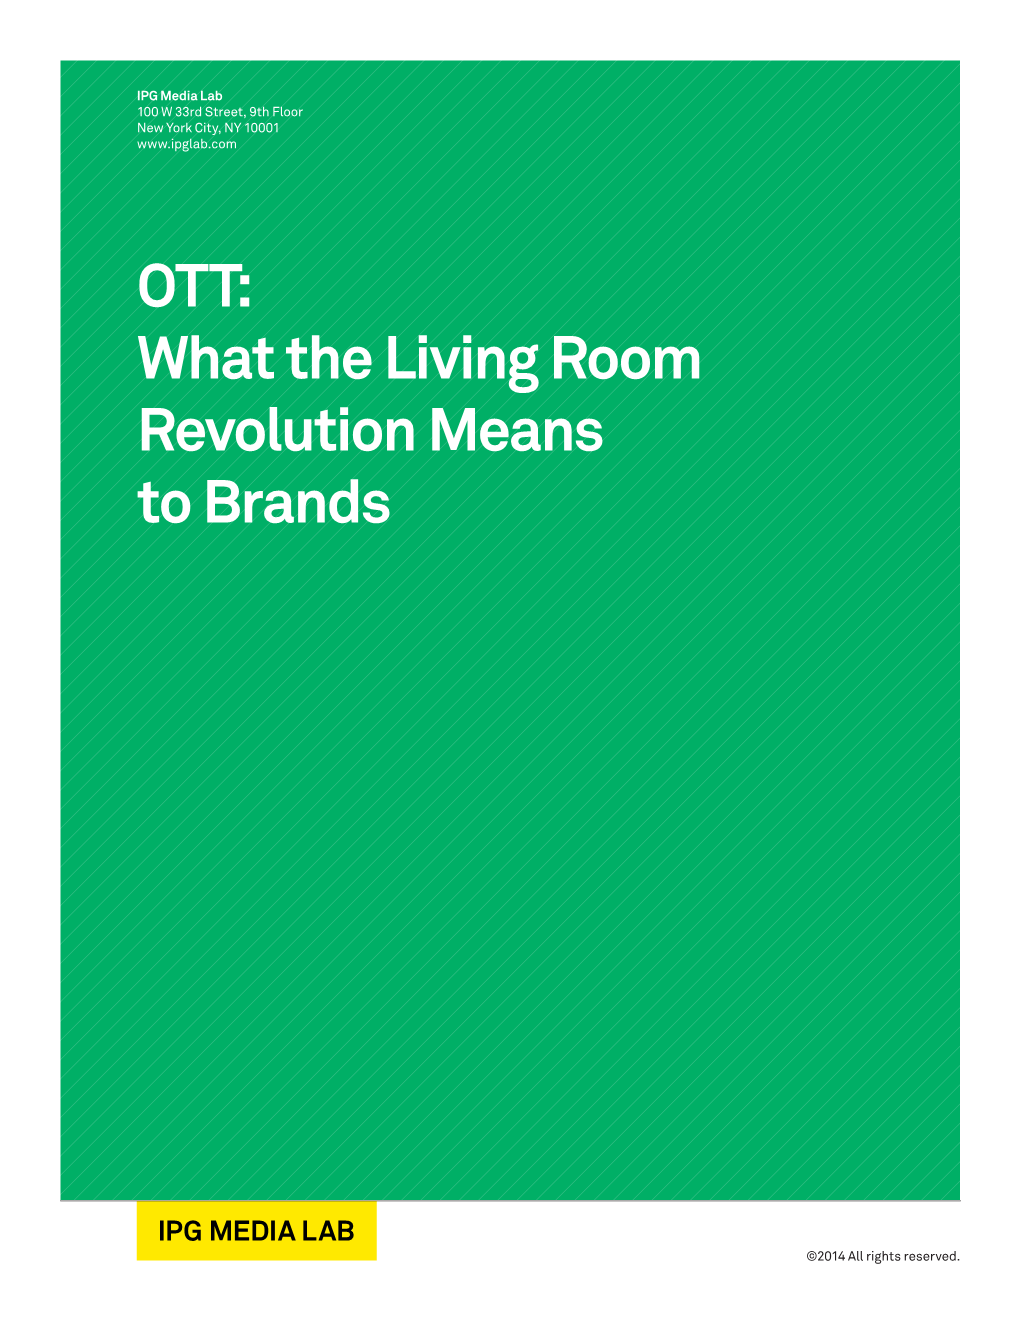 OTT: What the Living Room Revolution Means to Brands